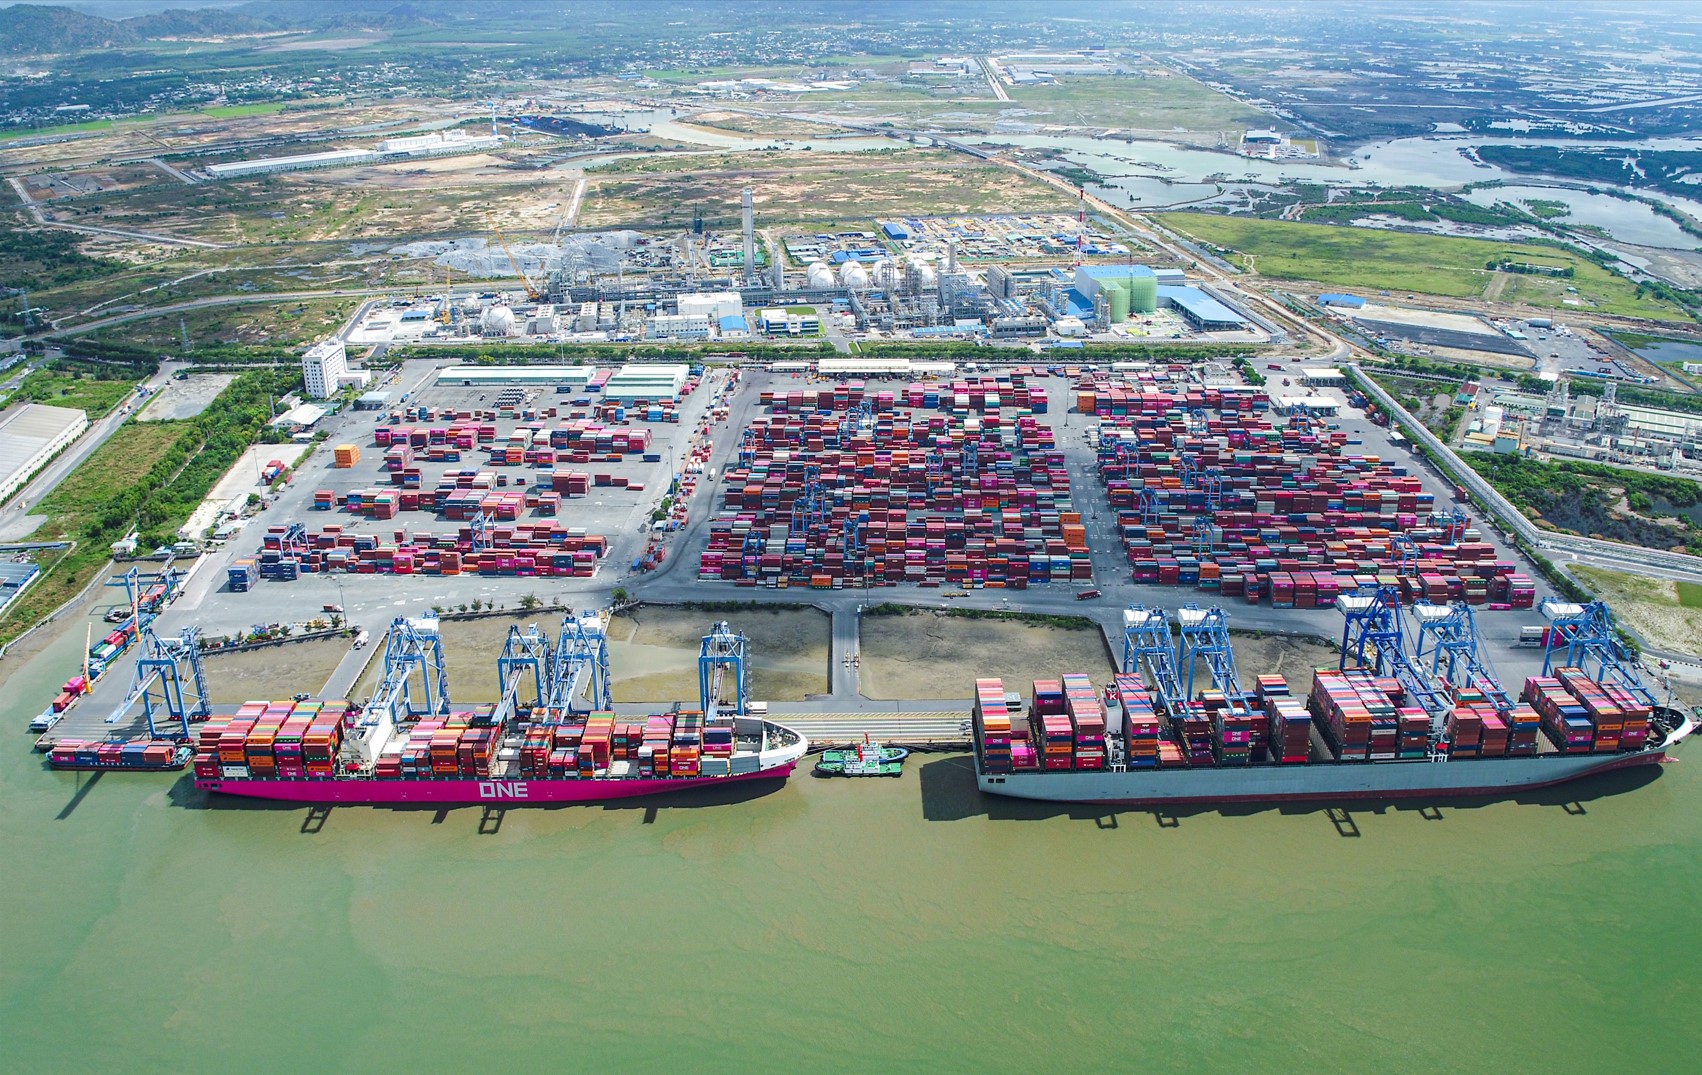 CAI MEP PORT IS RANKED 11TH AMONG THE MOST EFFICIENT CONTAINER PORTS IN THE WORLD